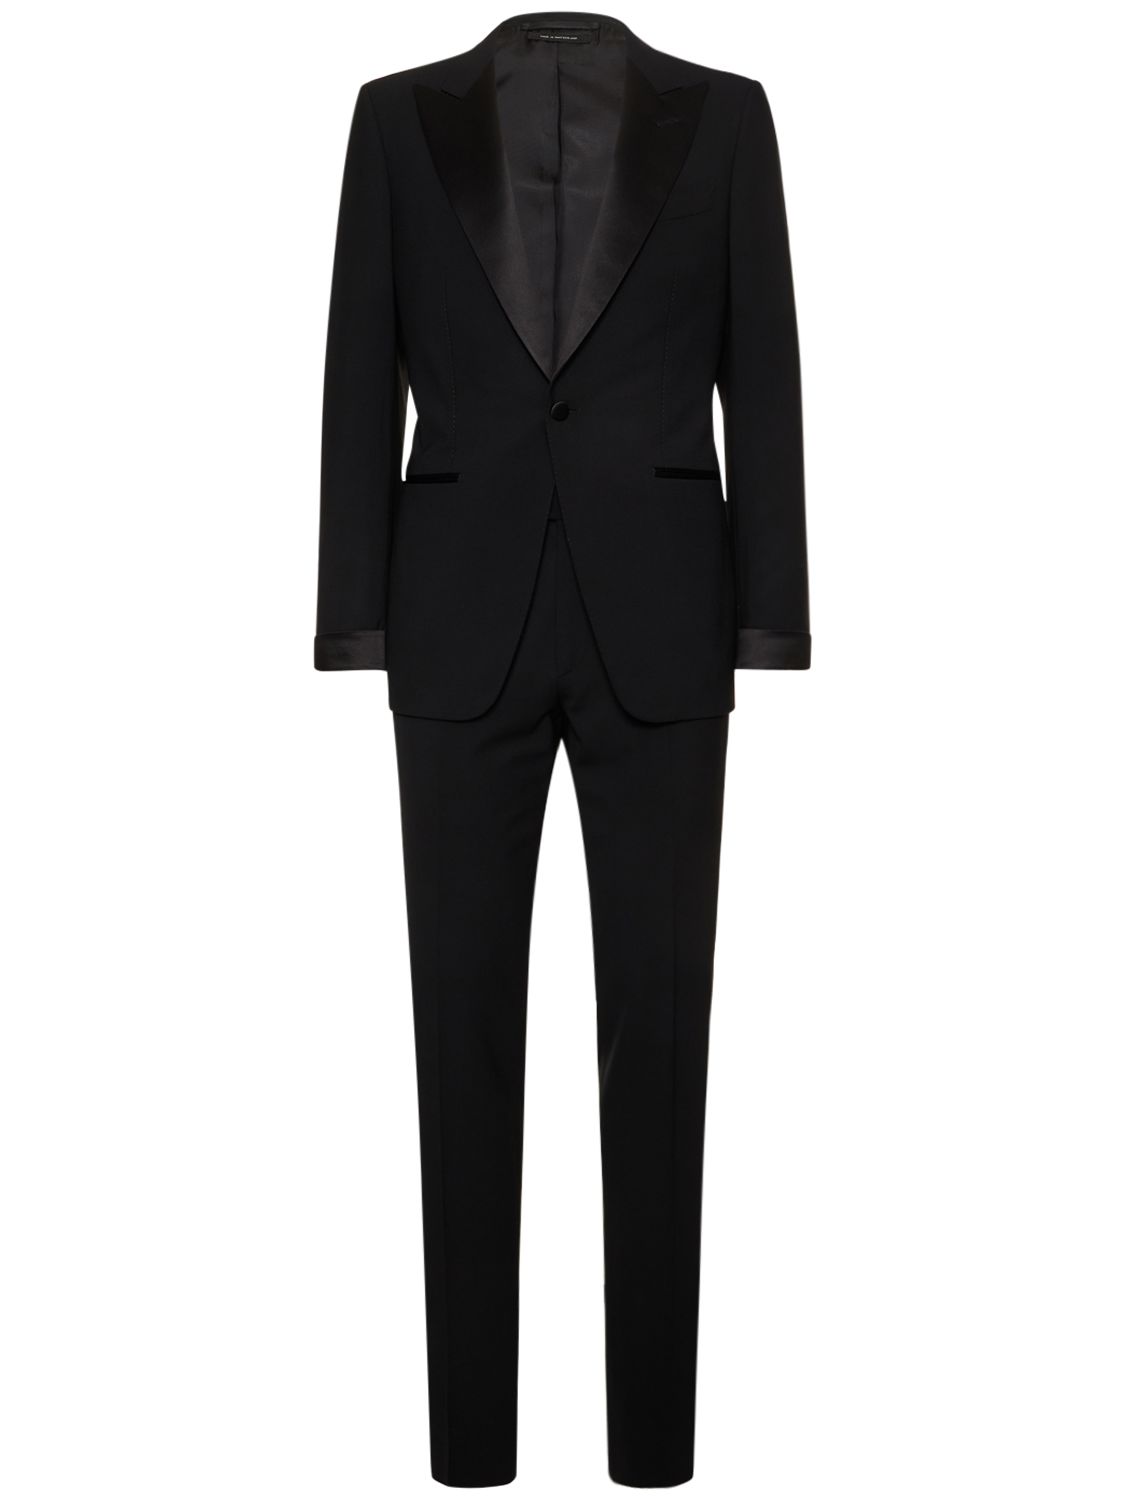 O'connor Stretch Wool Plain Weave Suit